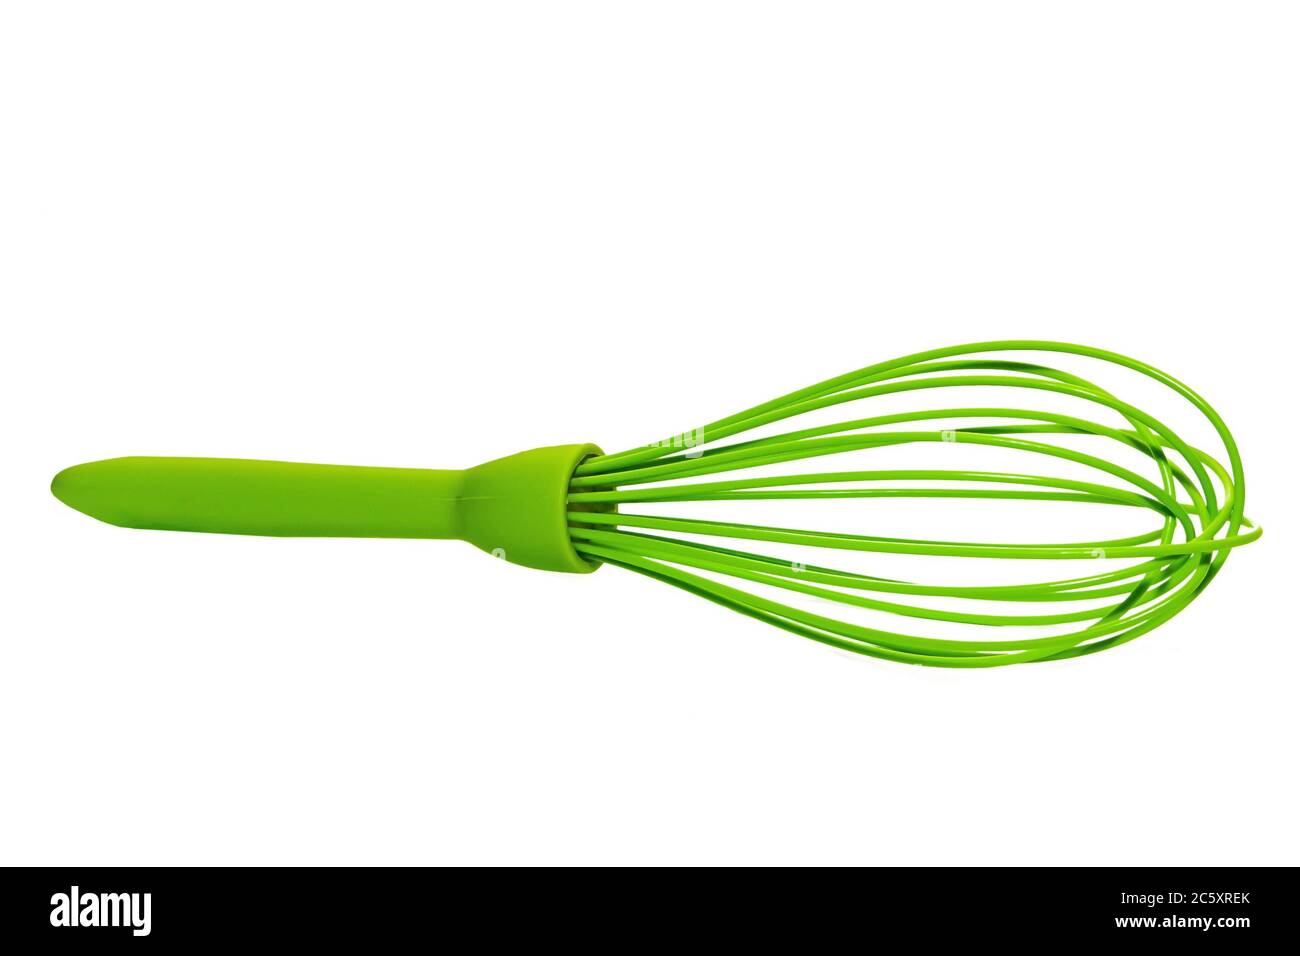 https://c8.alamy.com/comp/2C5XREK/green-silicone-culinary-whisk-for-whipping-isolated-on-a-white-background-2C5XREK.jpg